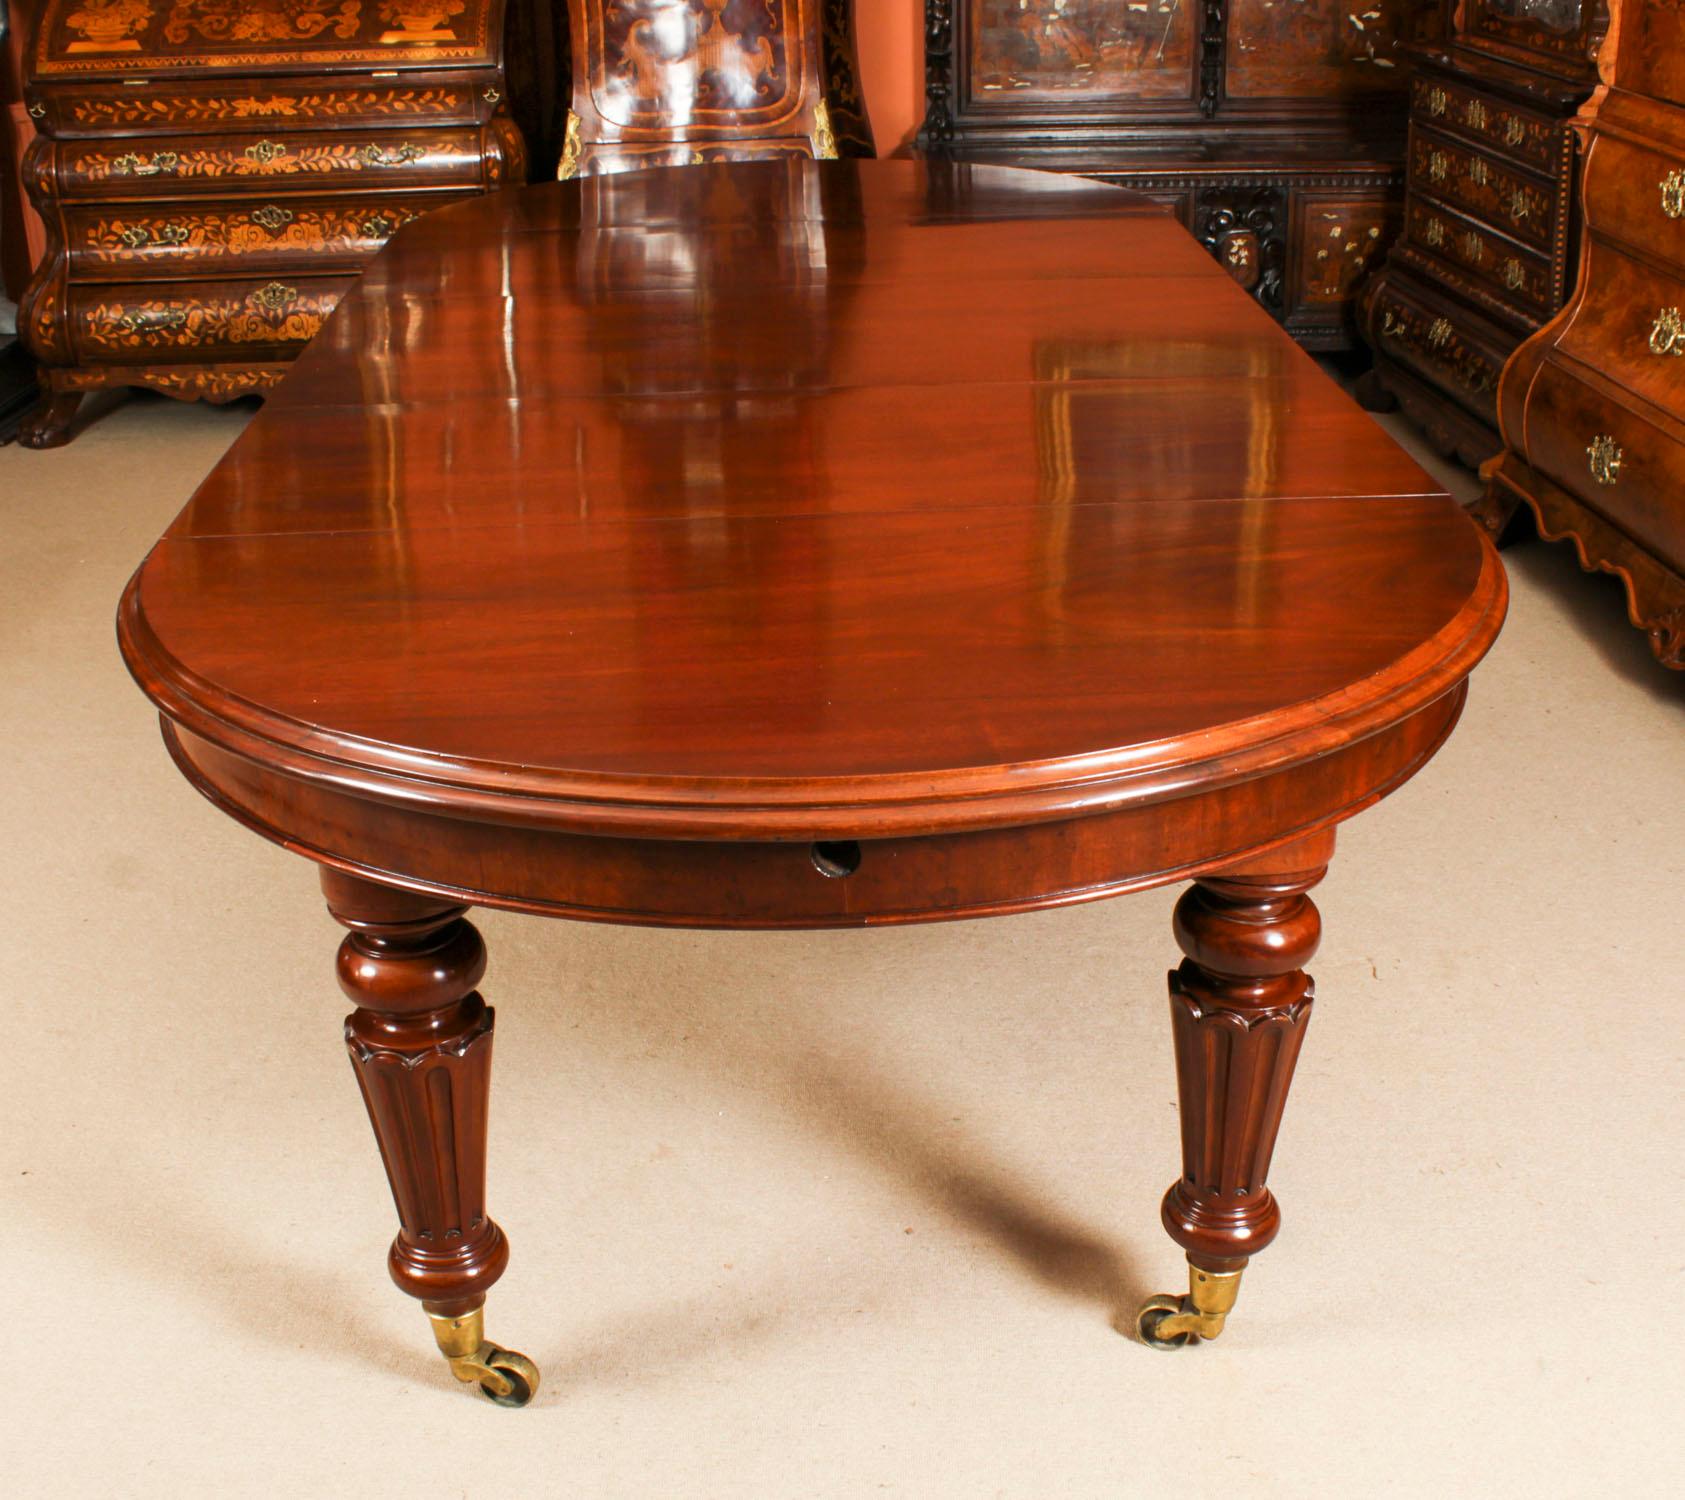 This is a fabulous antique Victorian flame mahogany extending dining table, circa 1860 in date. 

The table has three original leaves, can comfortably seat ten and it has been hand-crafted from solid flame mahogany which has a beautiful grain and